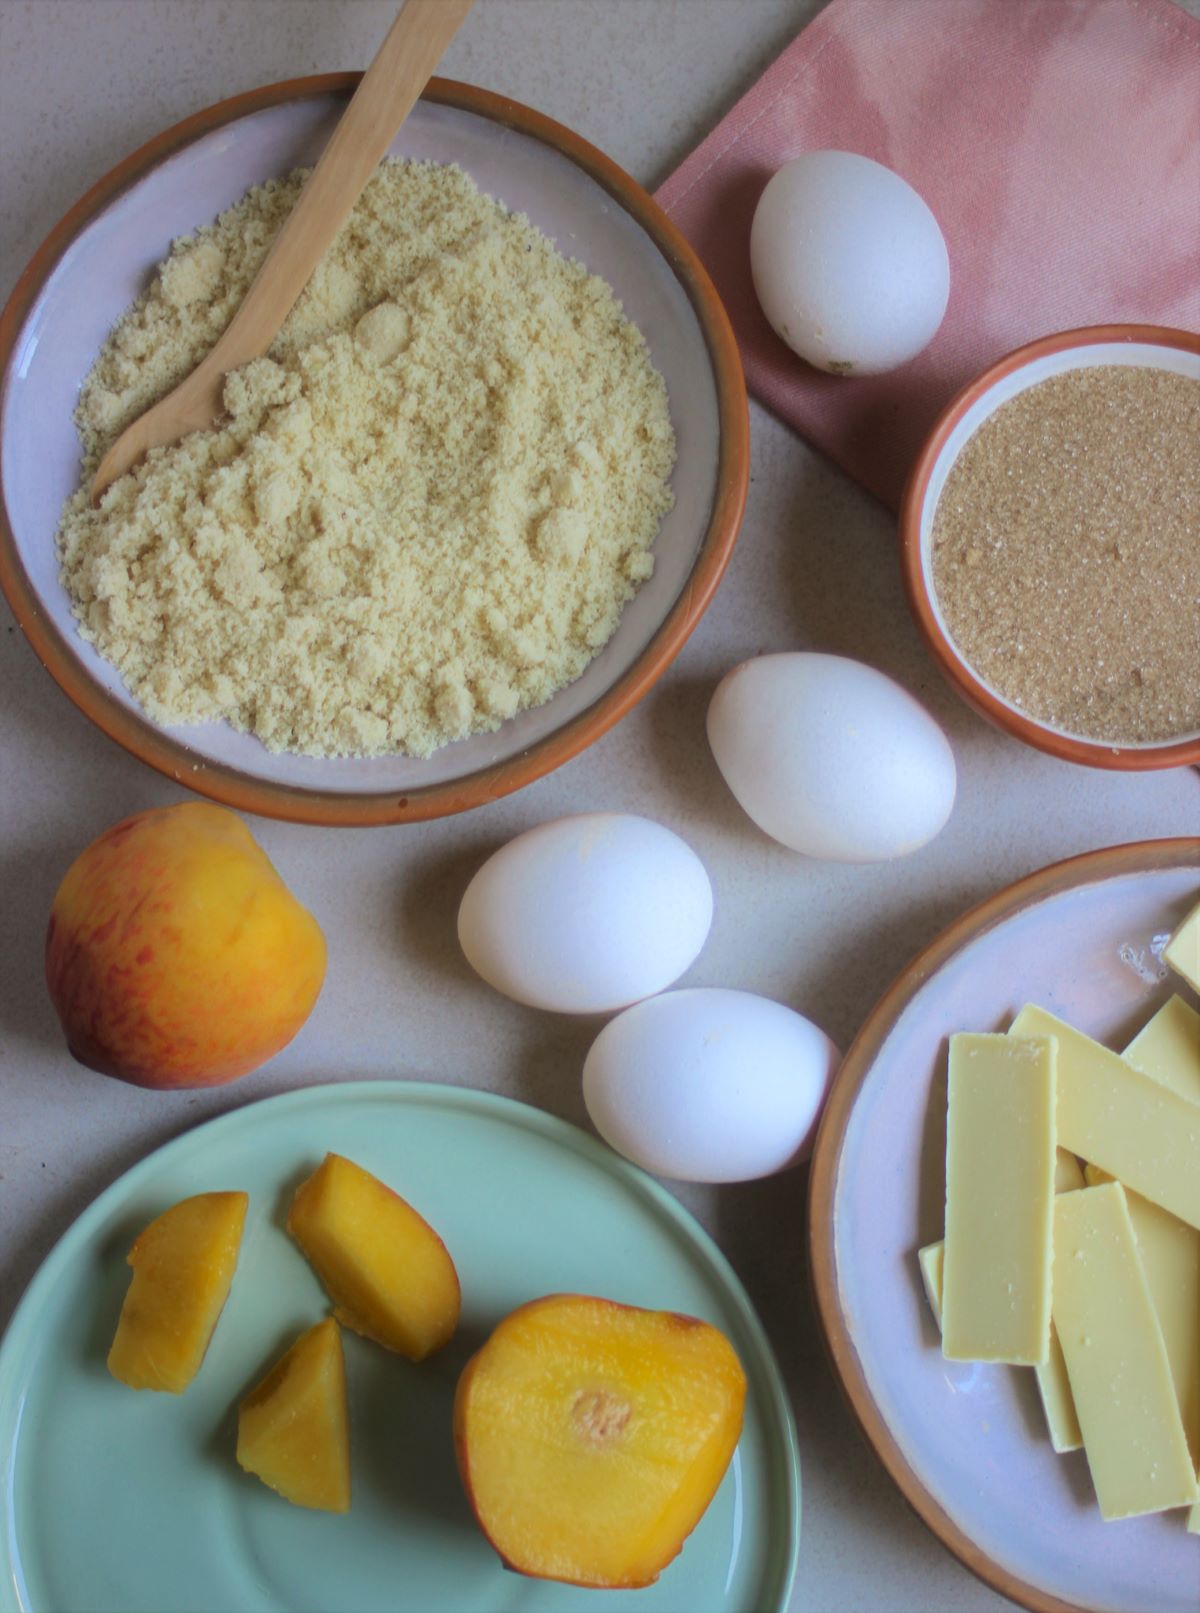 Almond and peach bar ingredients.